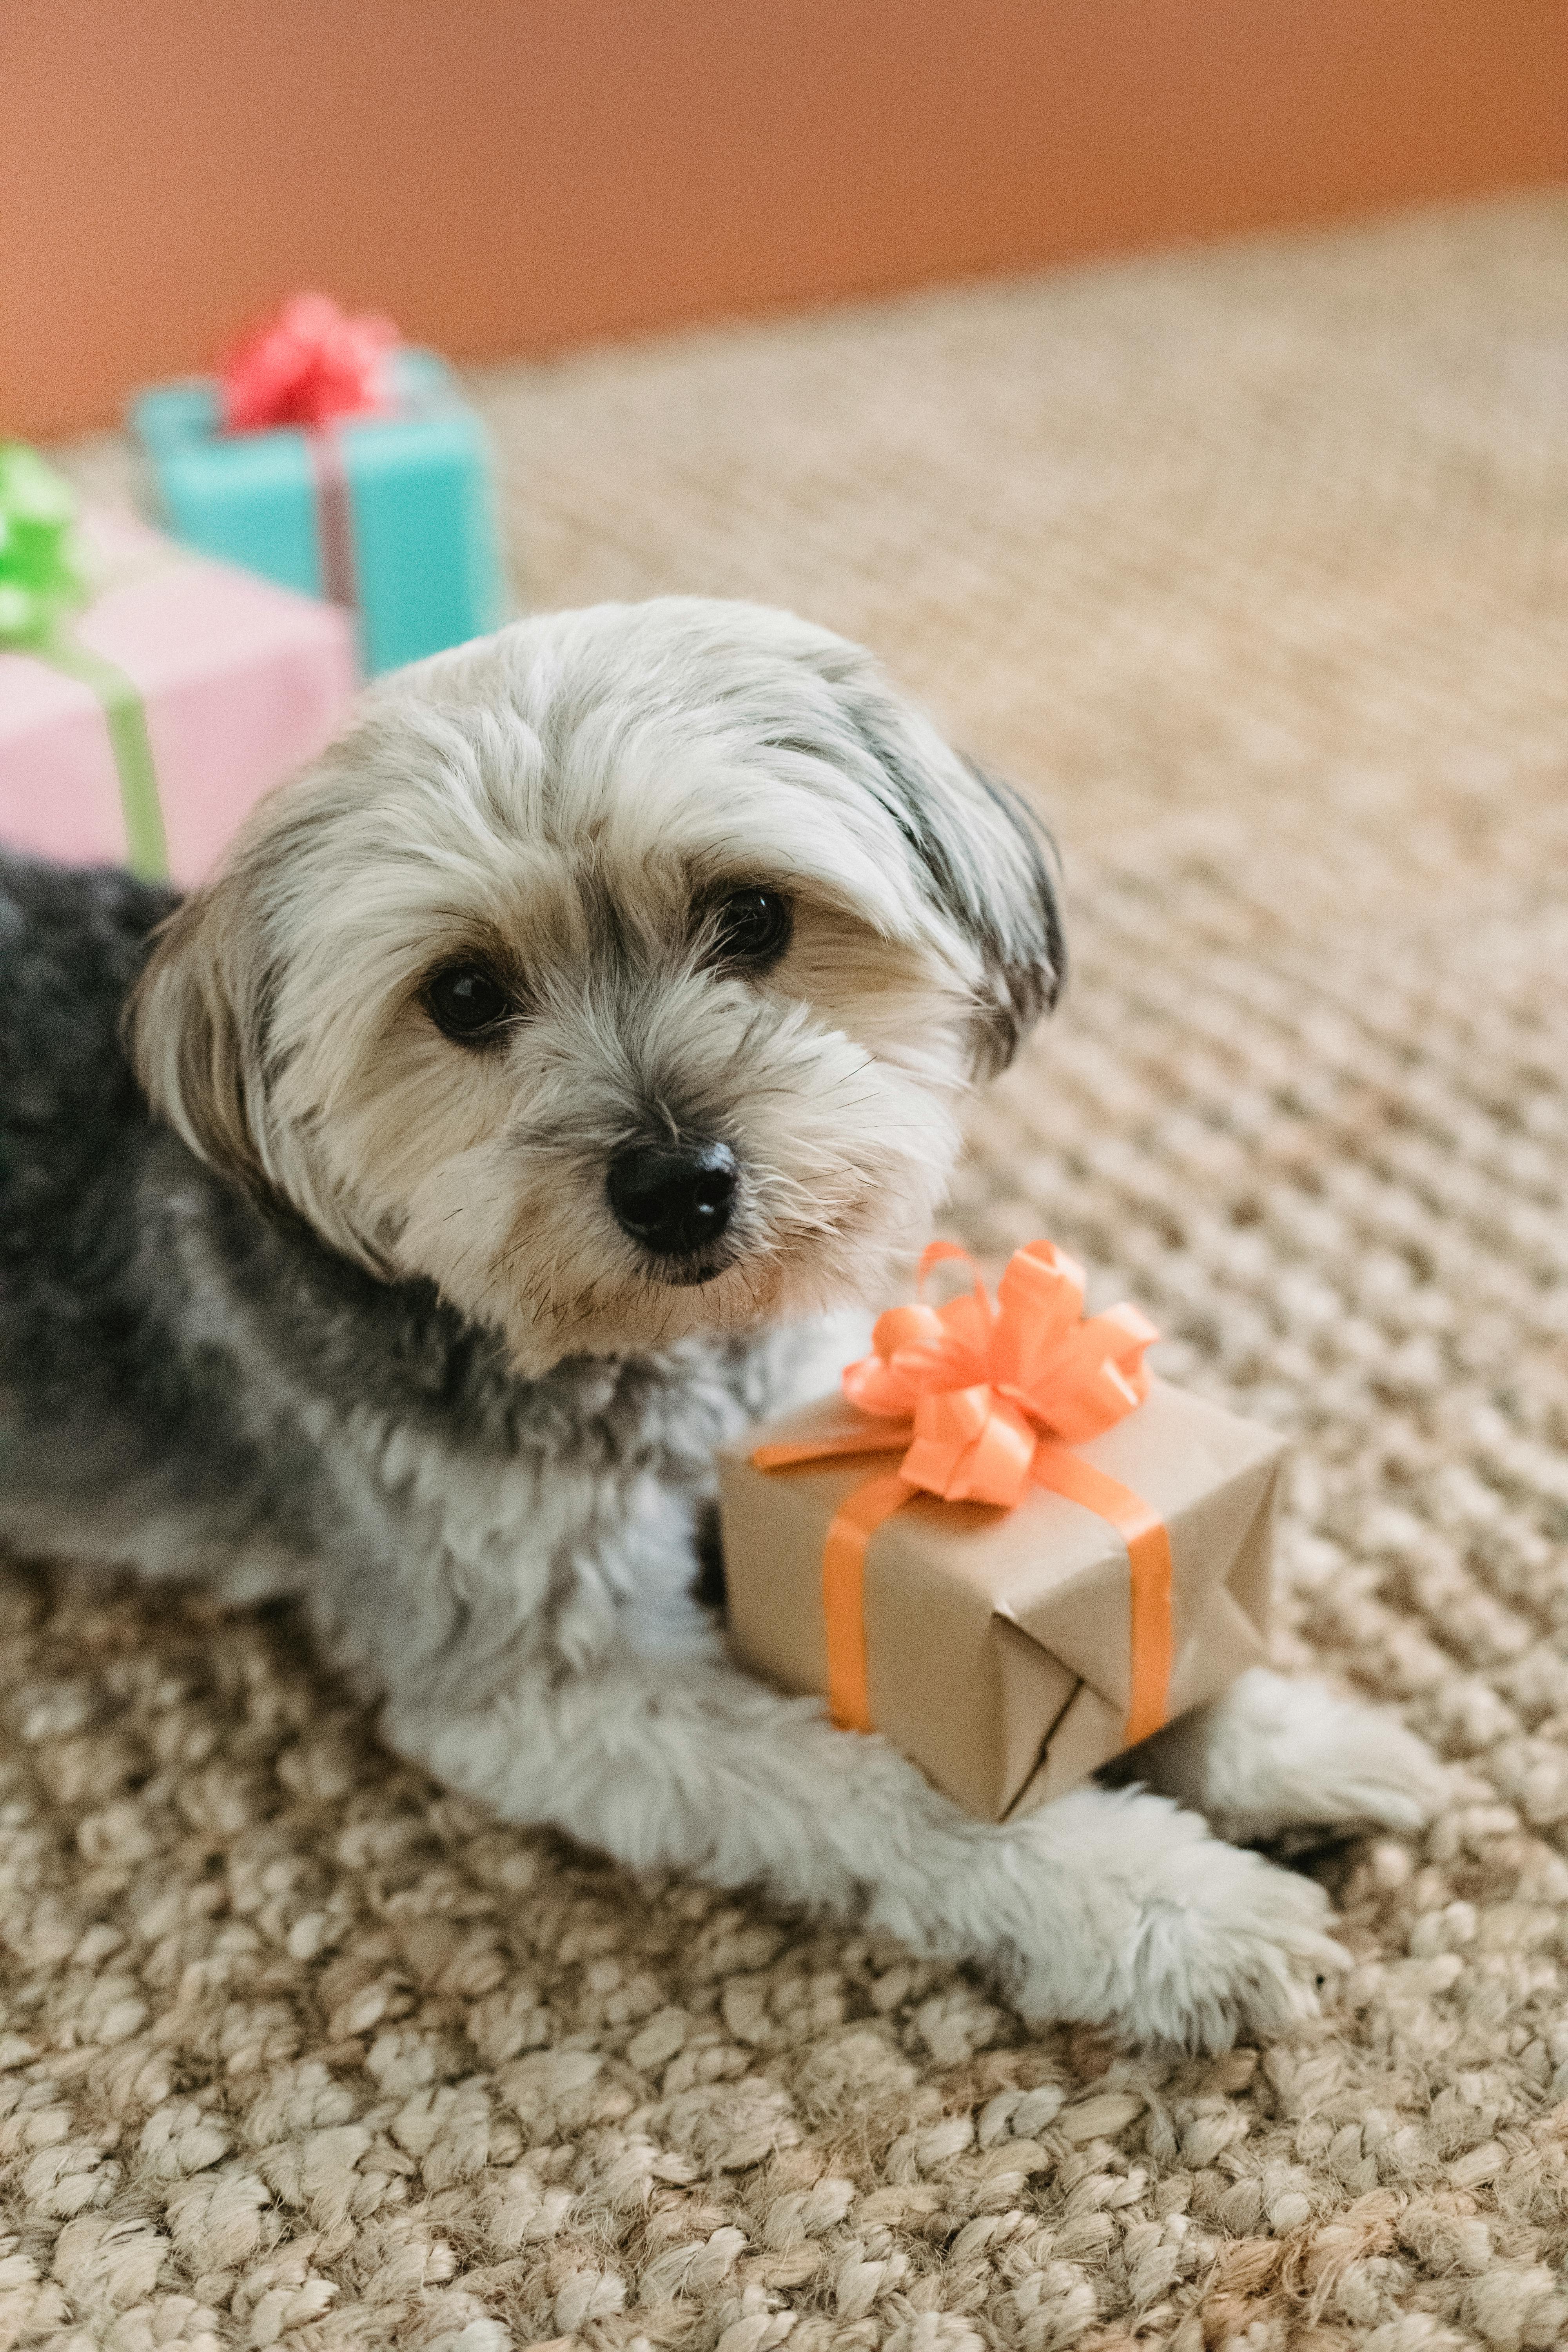 Cute dog with presents at home · Free Stock Photo